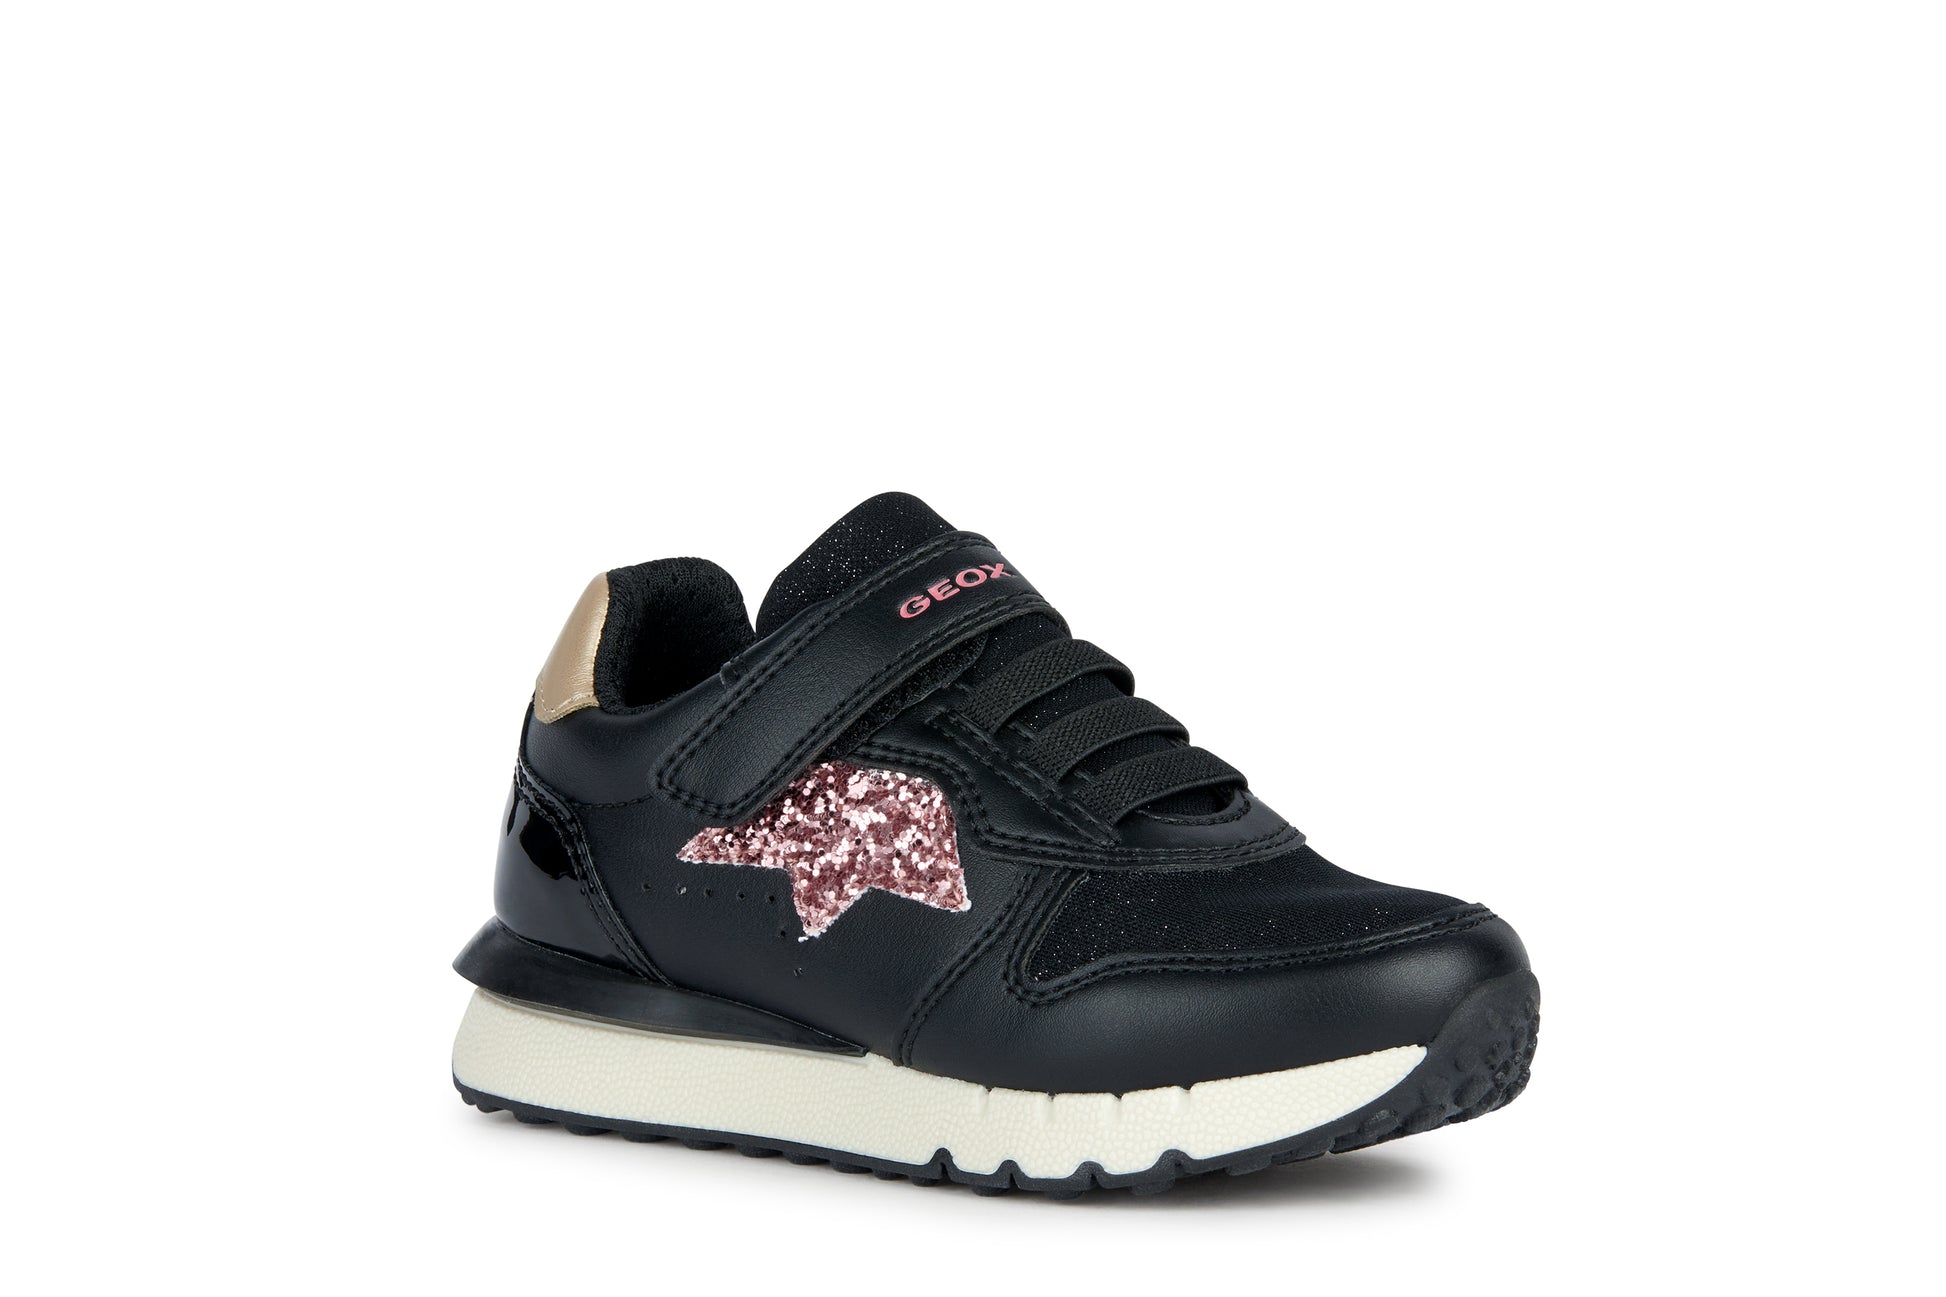 A girls casual trainer by Geox, style J Fasics Girl, in Black and Pink Glitter with elastic laces and single velcro fastening. Angled view.